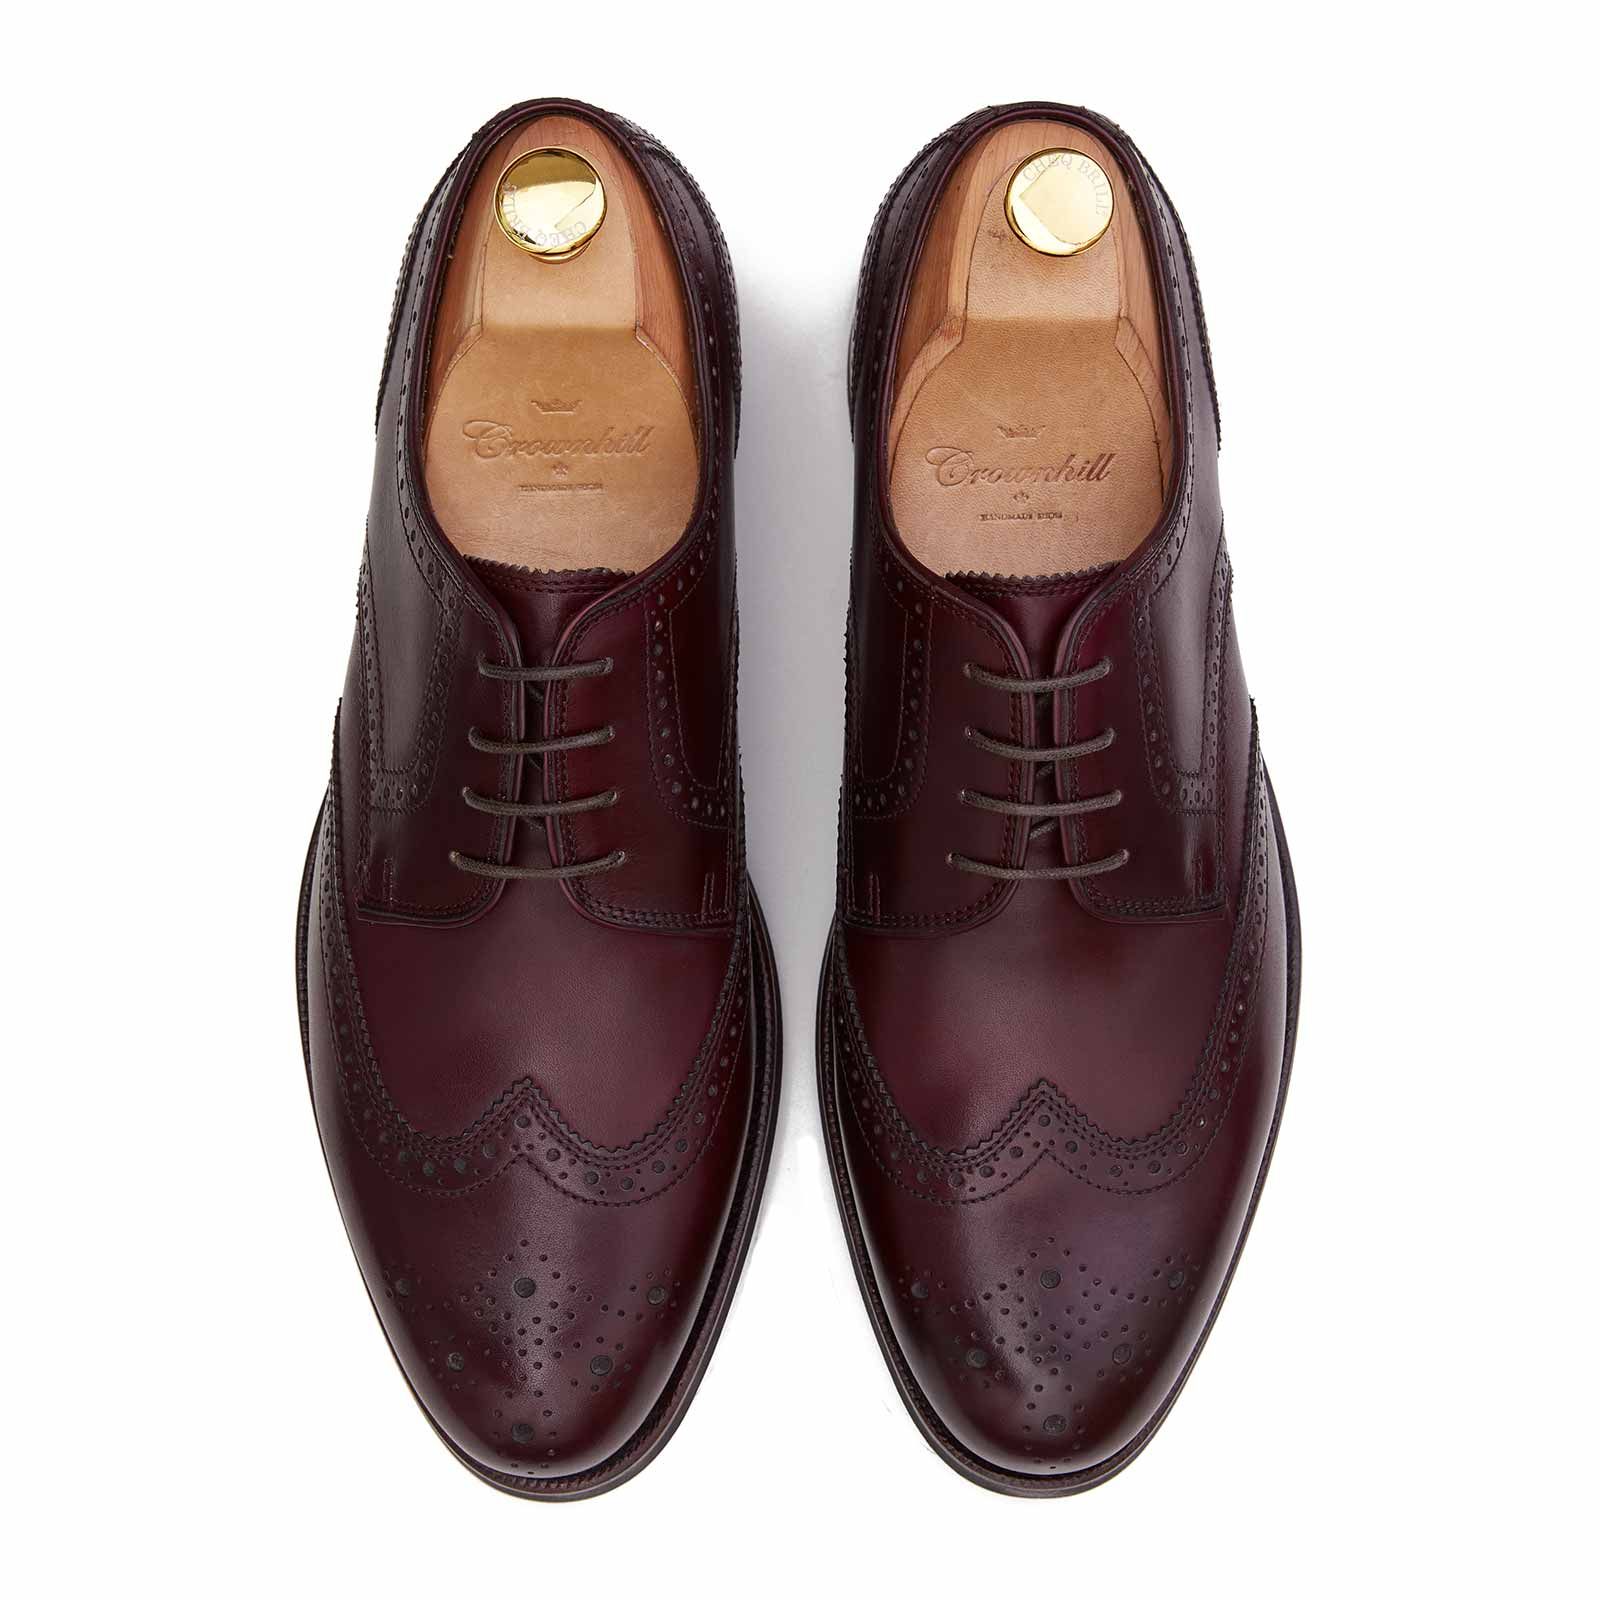 Apple Australia The owner The Rotterdam: Burgundy wingtip derby rubber sole shoe|Crownhill Shoes